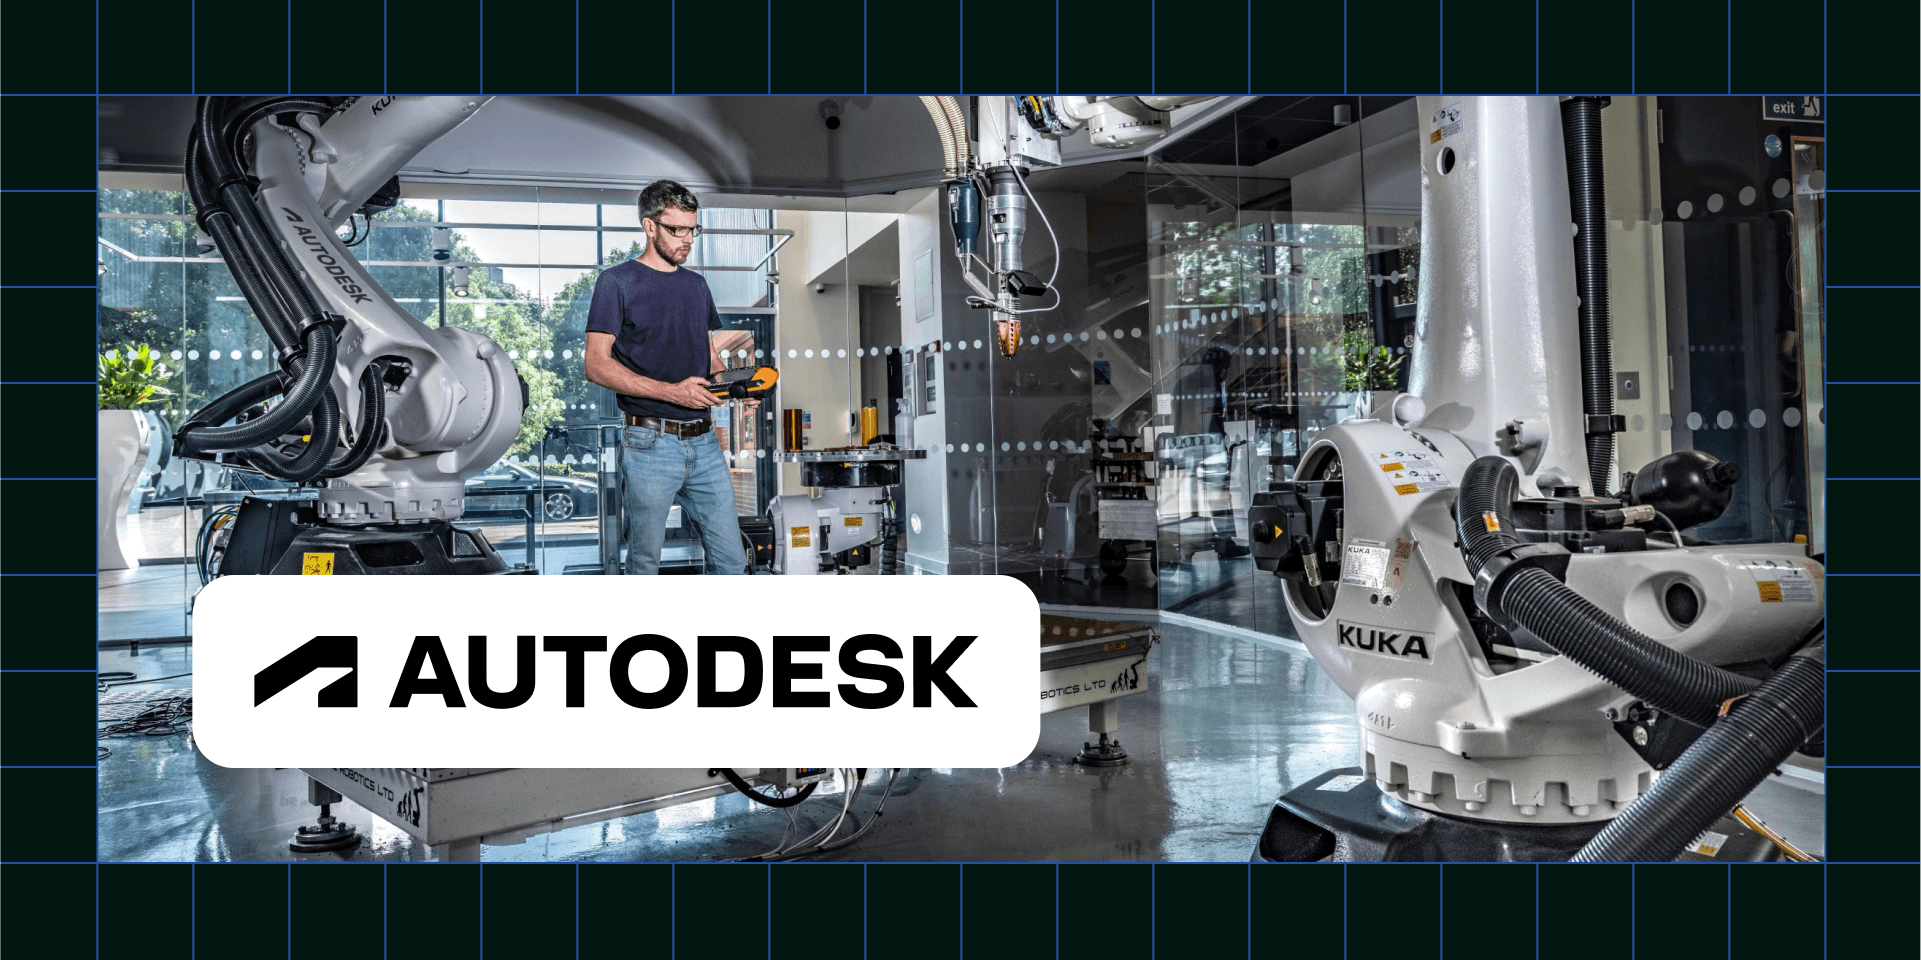 Autodesk builds a culture of self-service data for 13,000+ employees